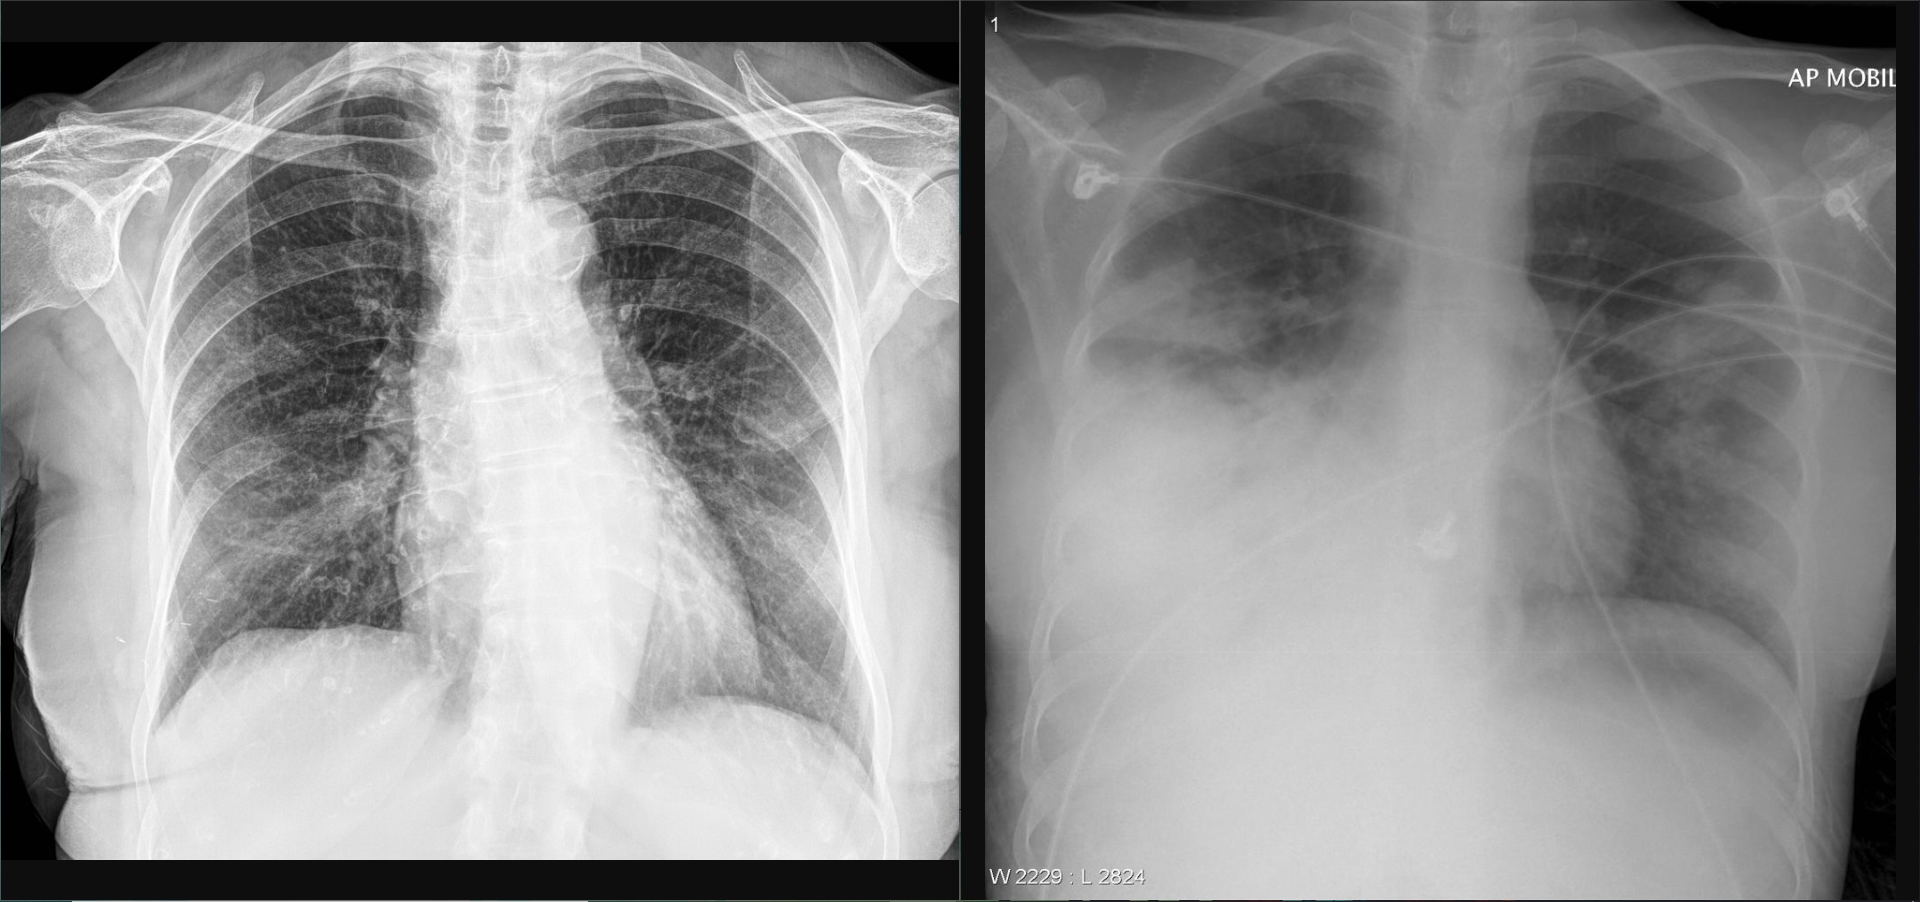 Using Deep Learning To Detect Pneumonia Caused By Ncov 19 From X Ray Images By Ayrton San Joaquin Towards Data Science